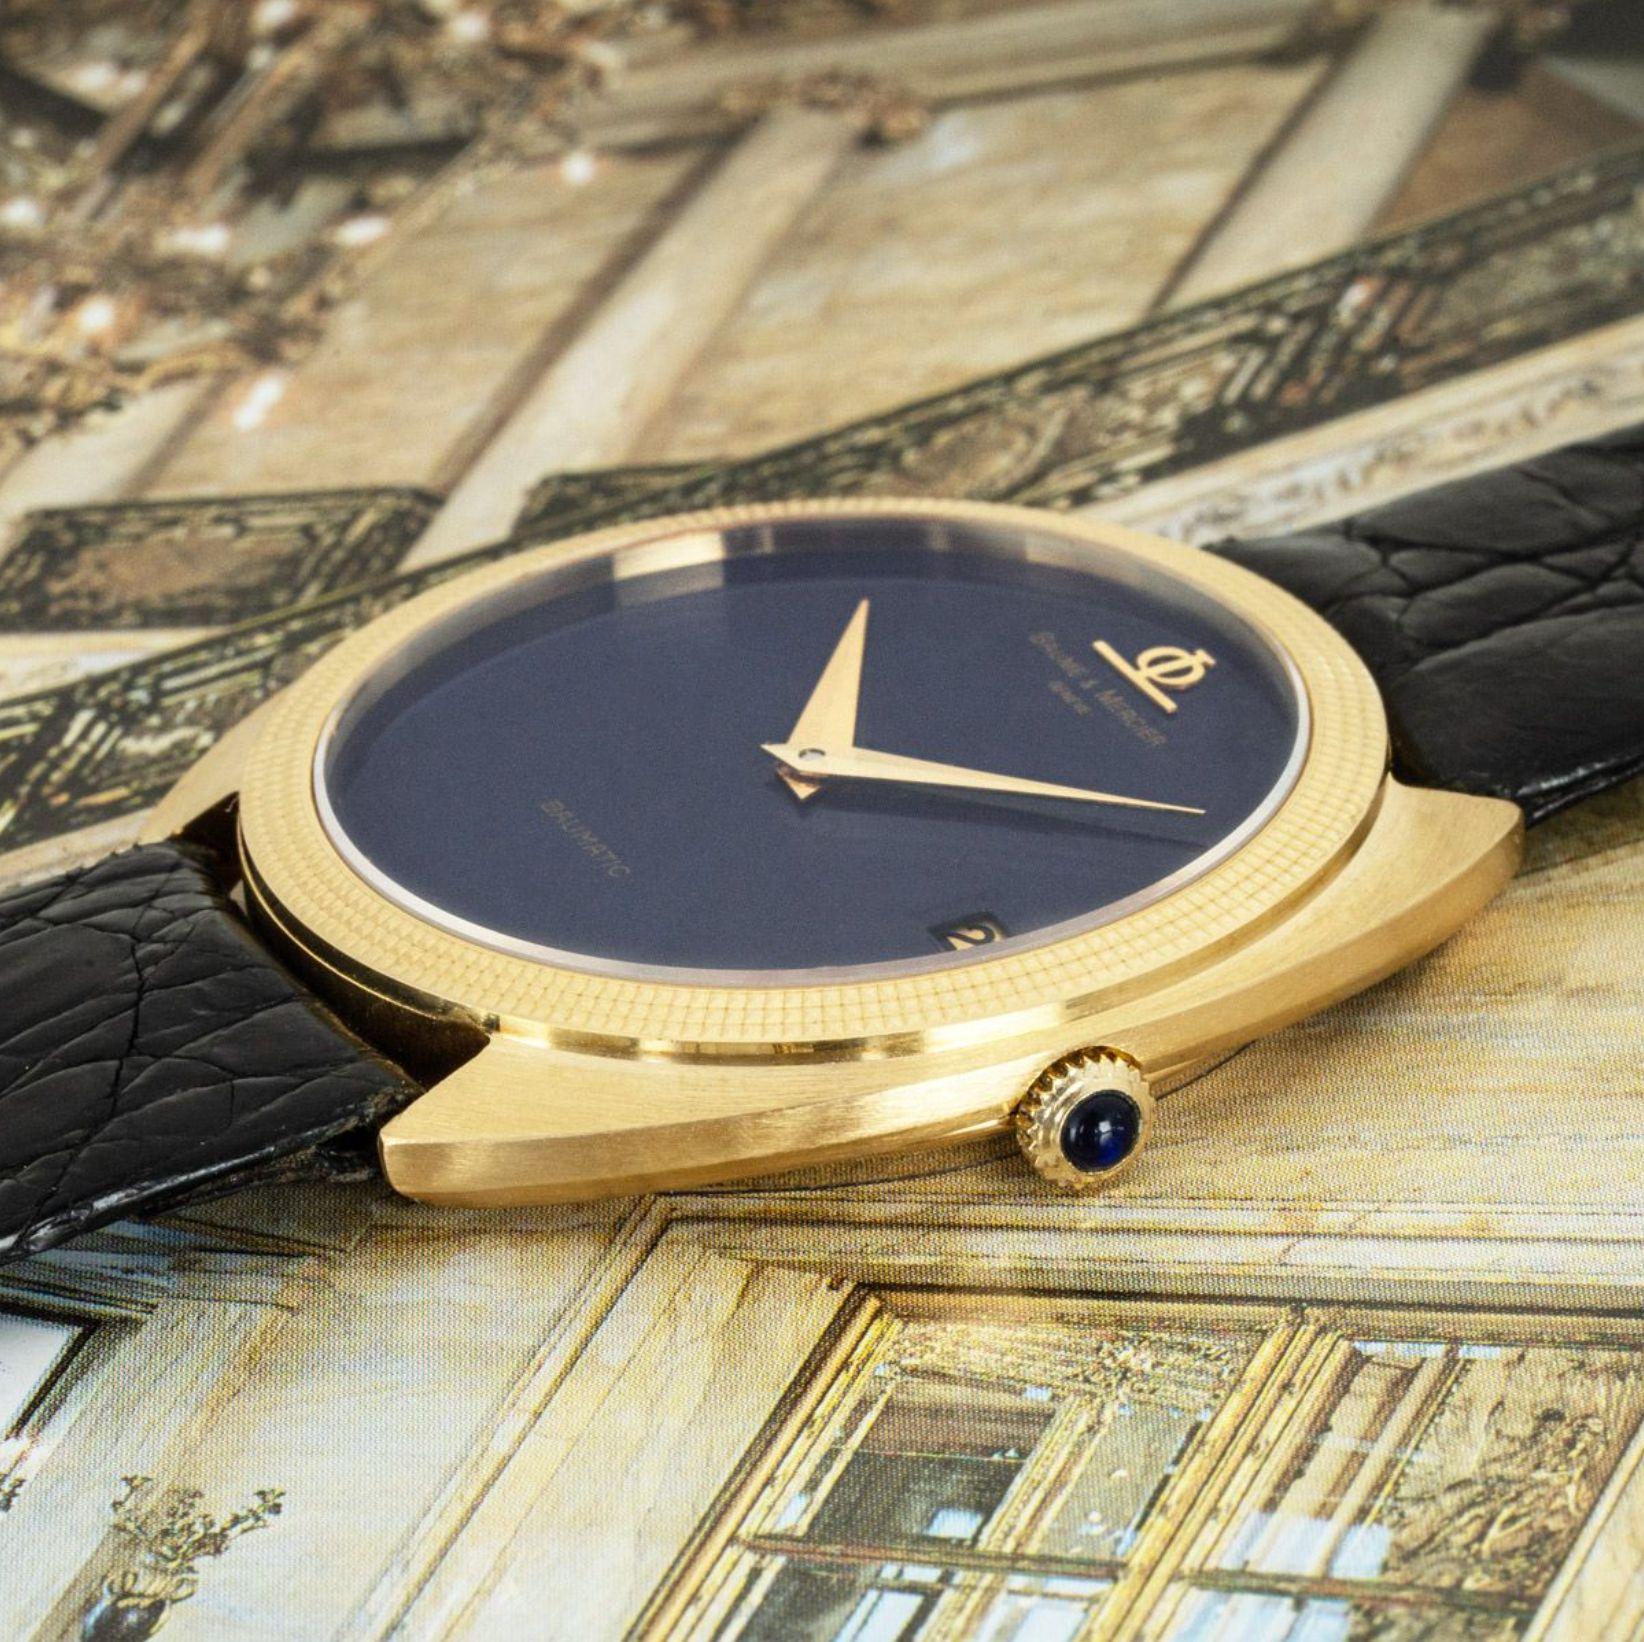 A 36mm yellow gold mens Baume & Mercier wristwatch. Featuring a stunning a lapis dial, a date aperture and a yellow gold bezel. The watch is fitted with a sapphire glass, a self-winding automatic movement and a Baume & Mercier black leather strap